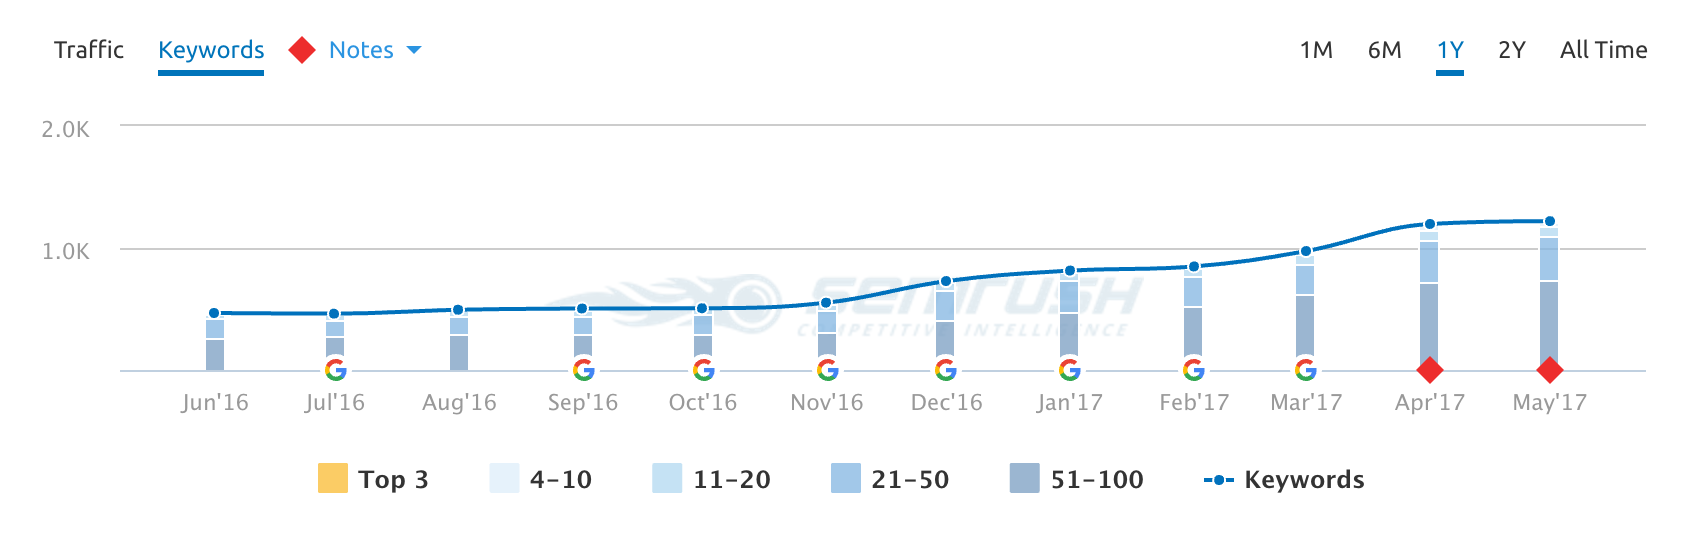 Brehob Keywords Analytics: The number of keywords ranking over the last year, as reported by SEMrush